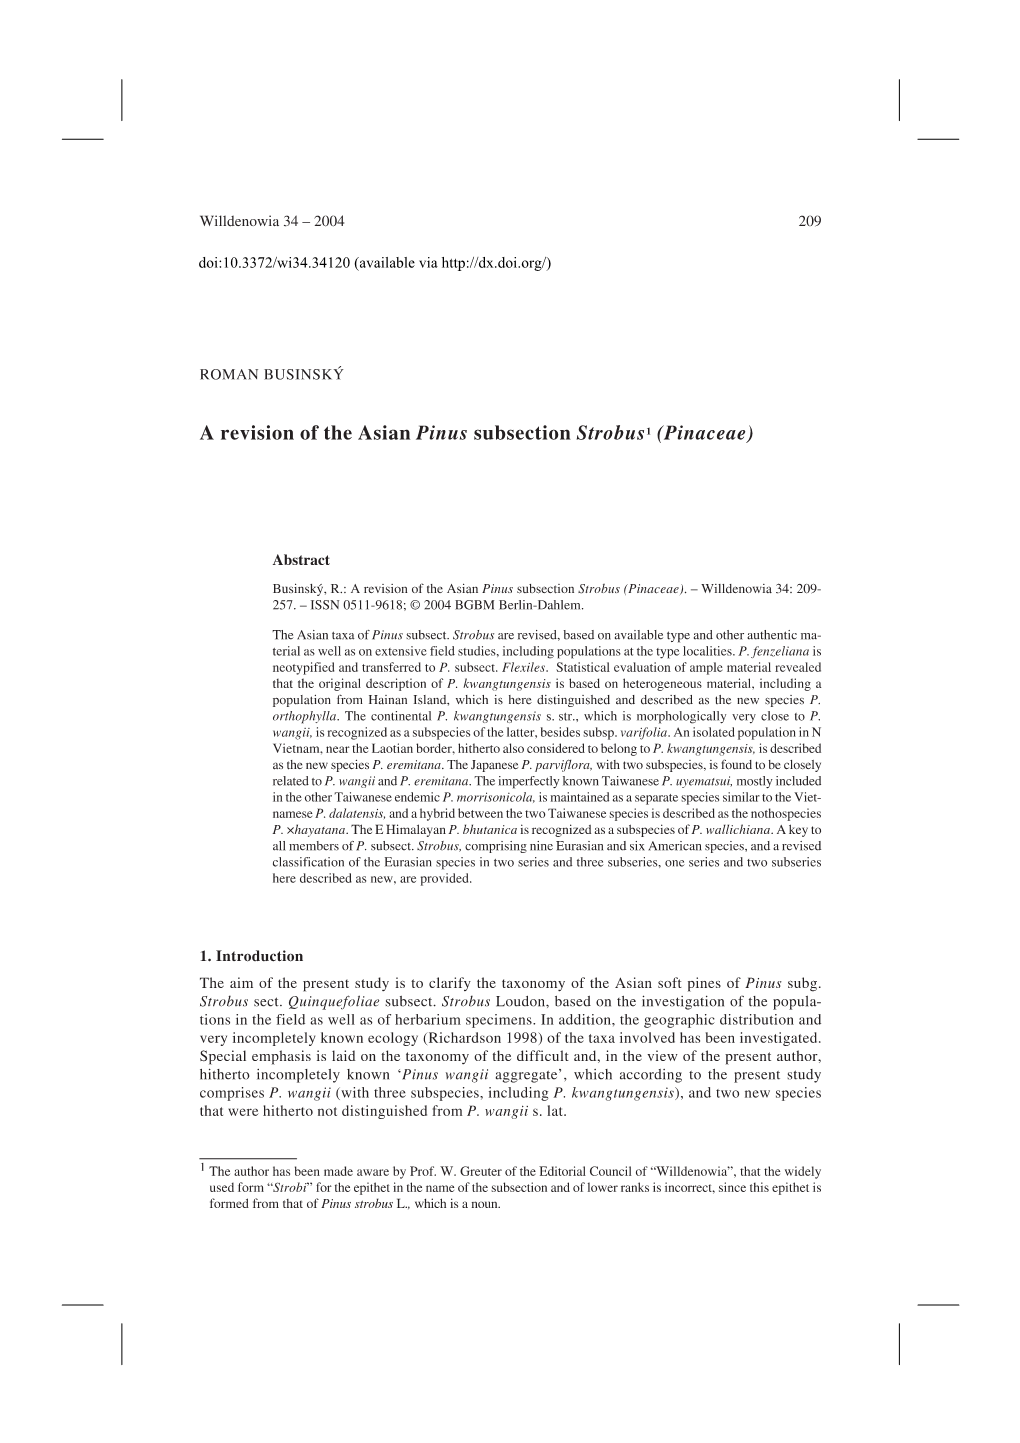 A Revision of the Asian Pinus Subsection Strobus1 (Pinaceae)